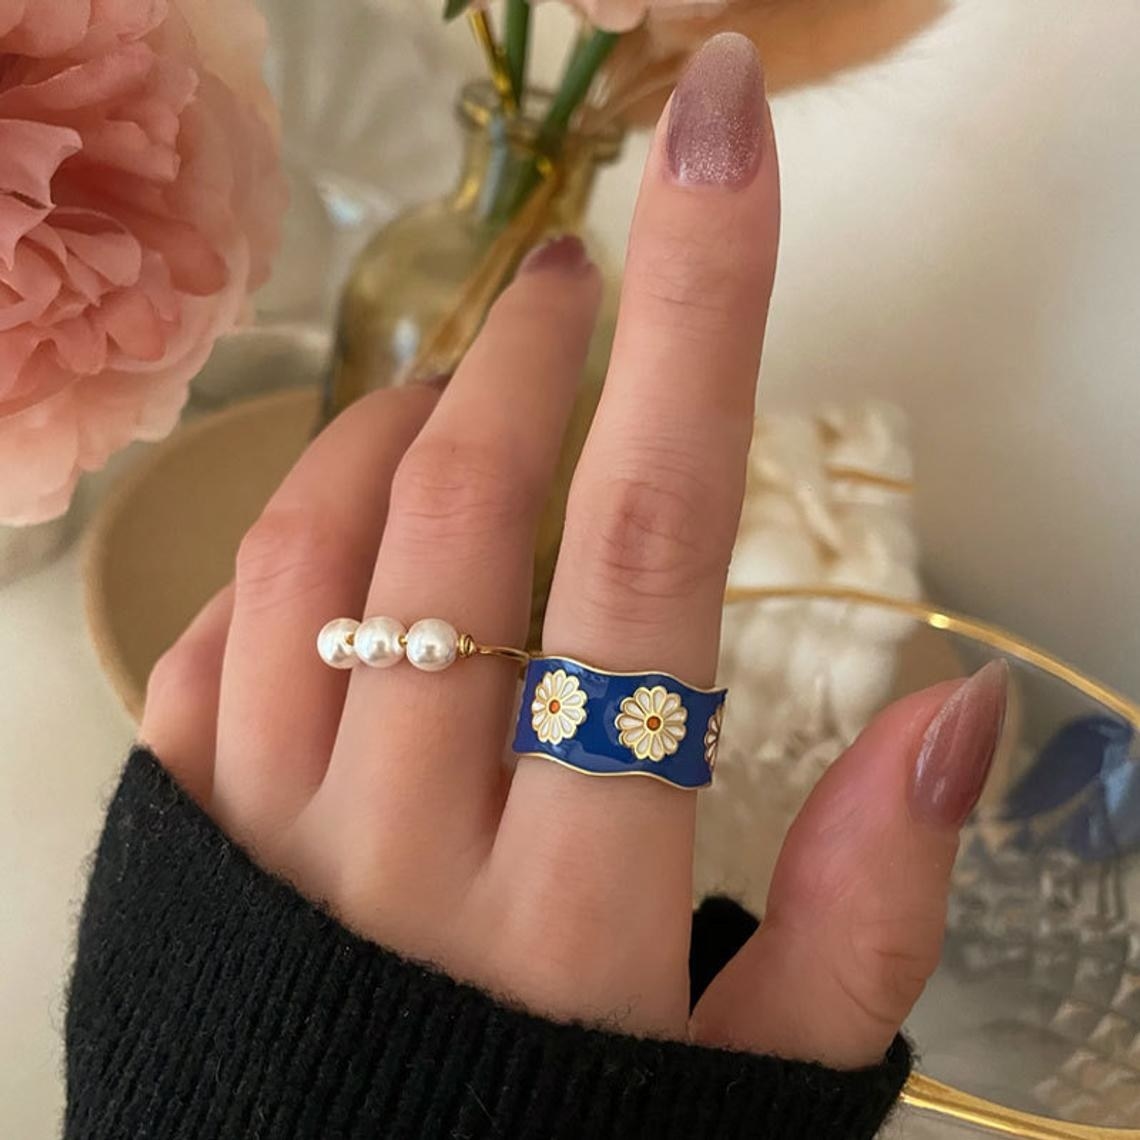 A person wearing the daisy ring